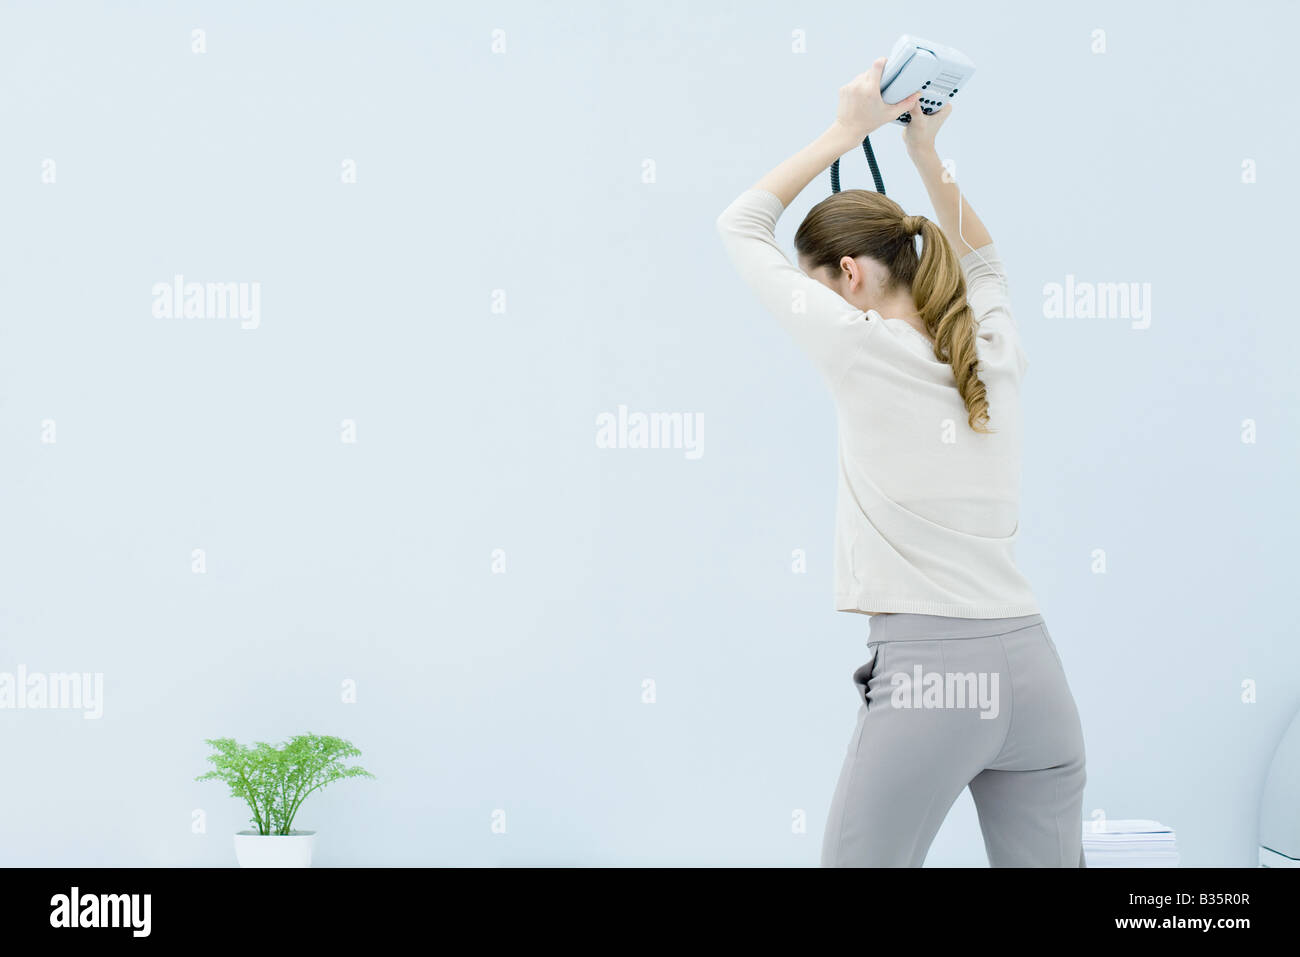 Young woman holding landline phone above her head ready to smash it on the ground, rear view Stock Photo